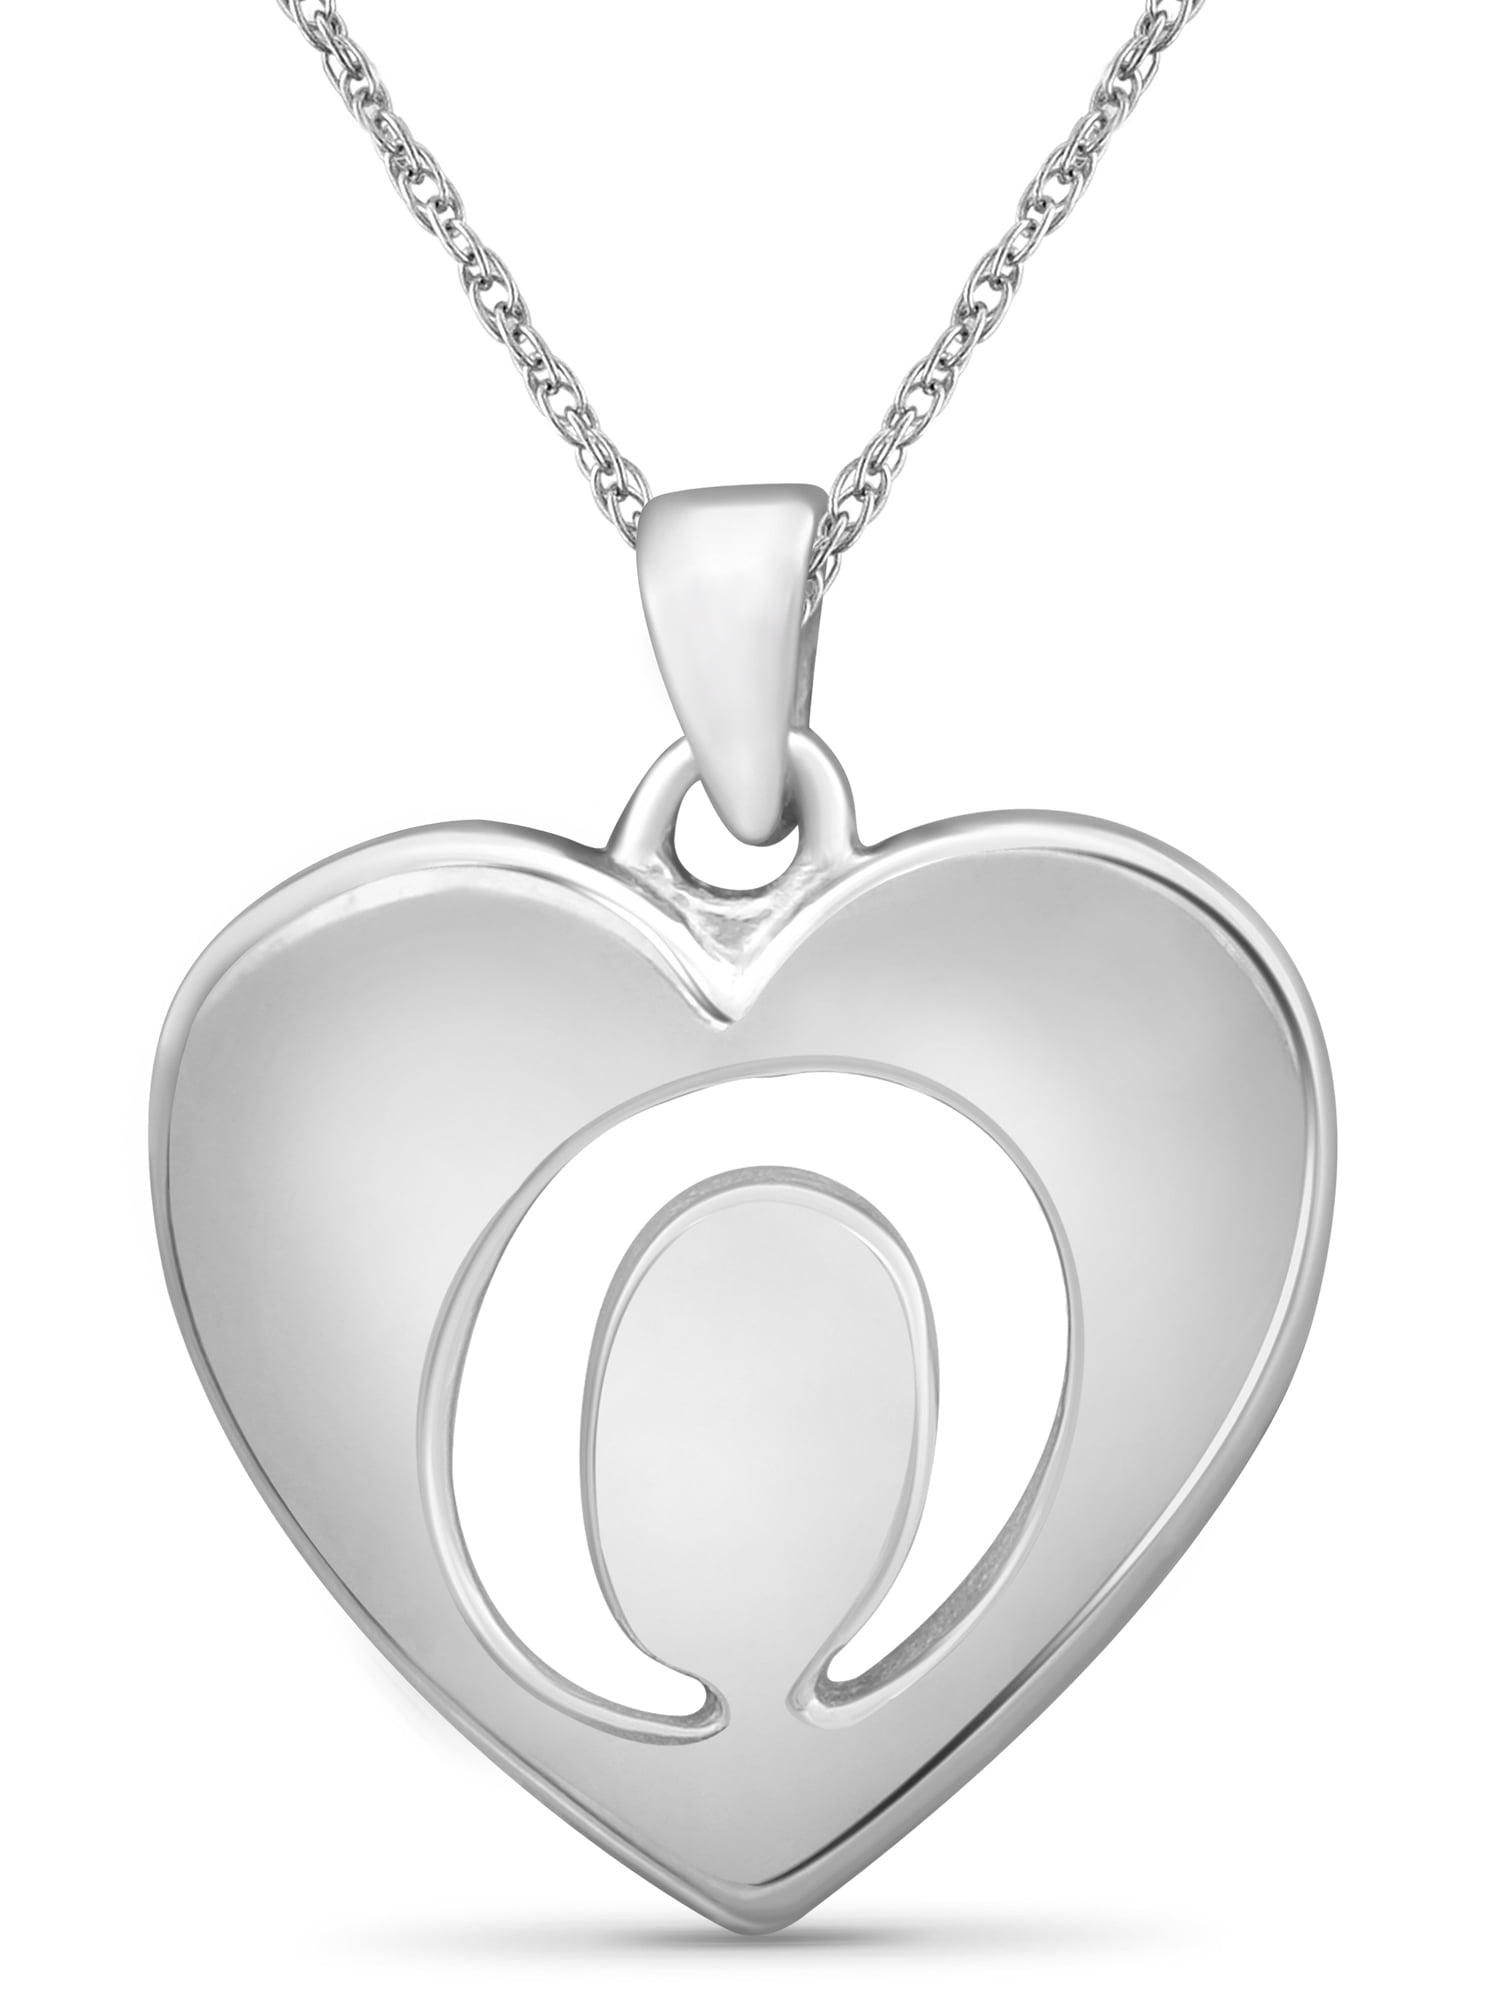 925 Sterling Silver Love Heart Filigree Pendant Sold alone: chain not included So Chic Jewels